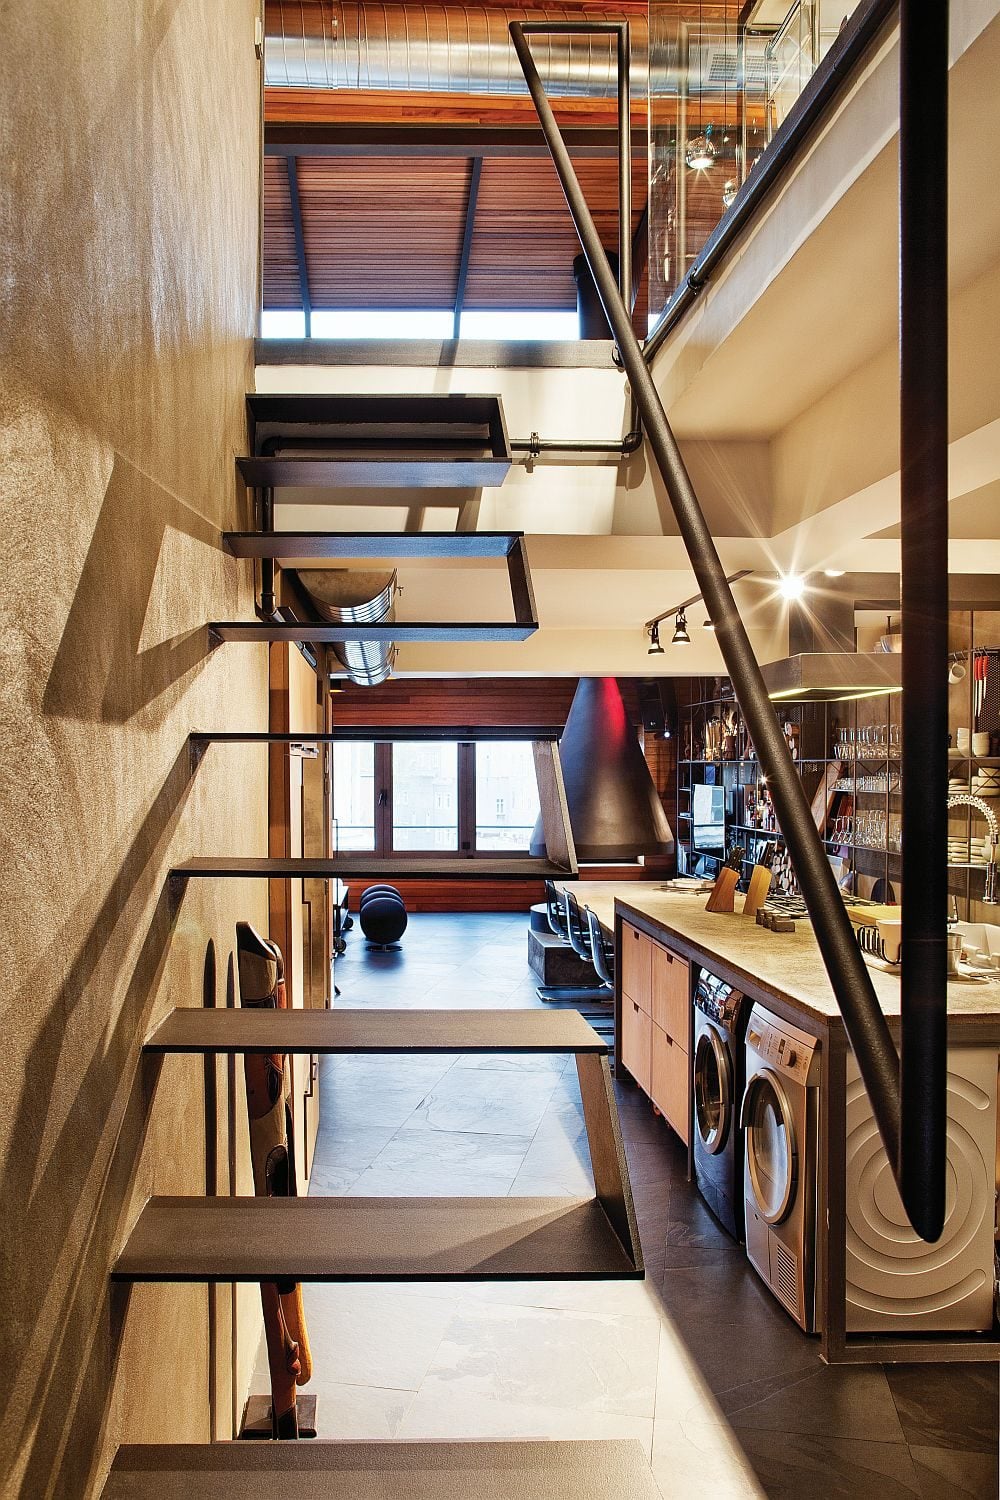 Creative-staircase-design-for-the-urban-industrial-style-loft